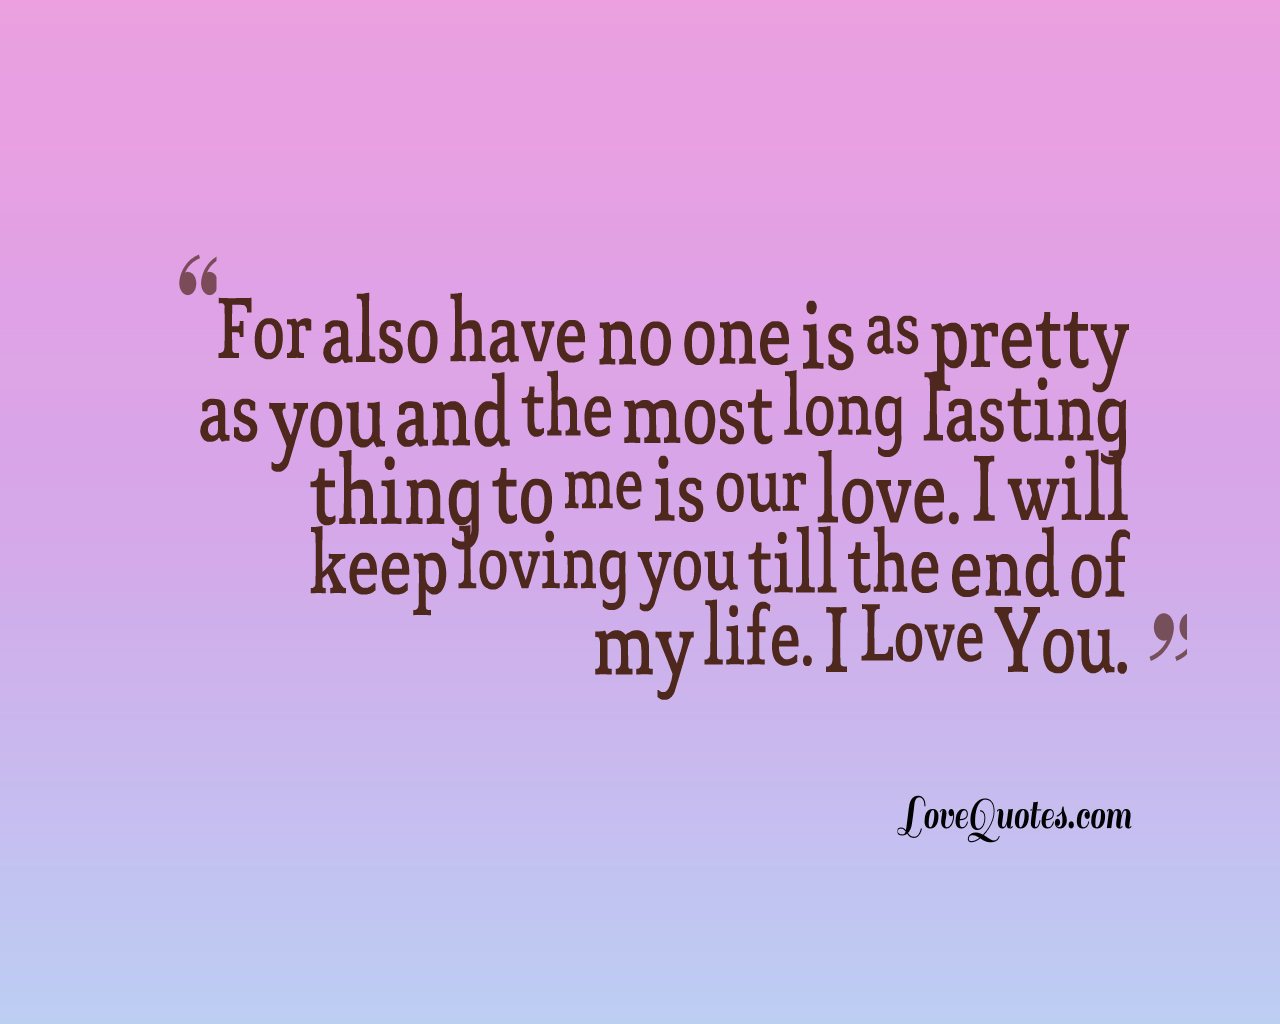 I Will Keep Loving You - Love Quotes